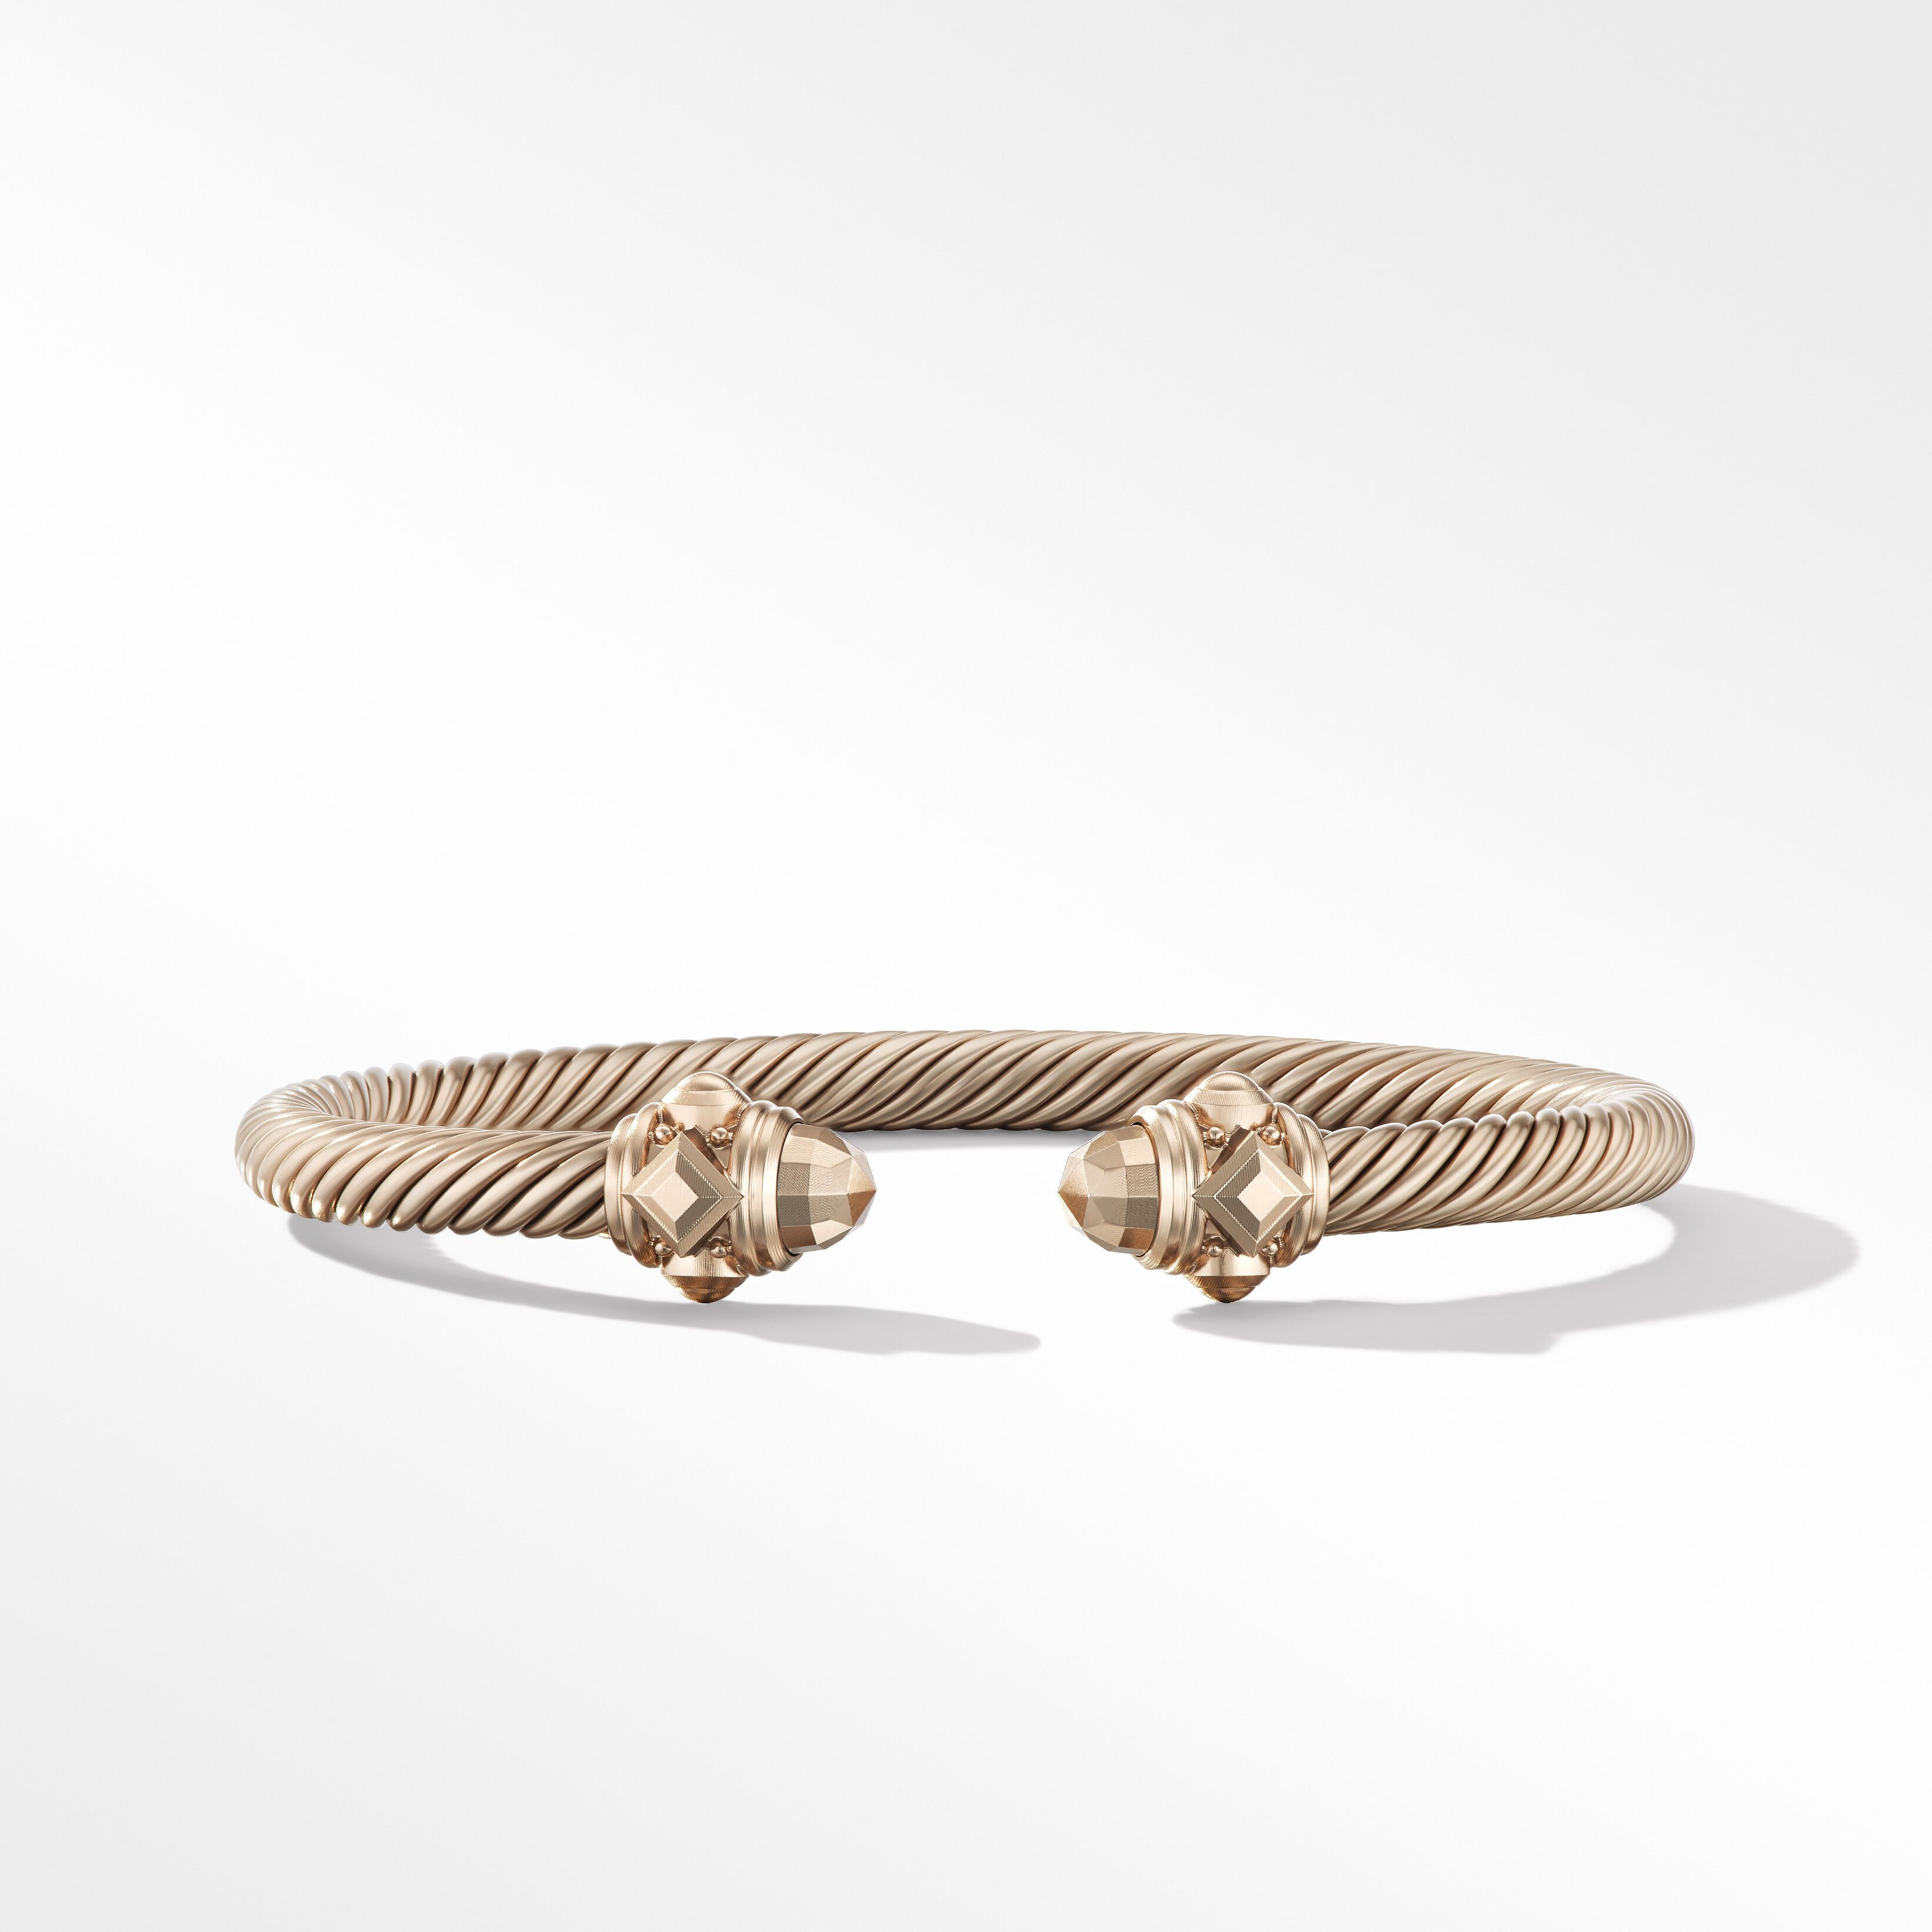 The Cable Collection®
for
Women | David Yurman